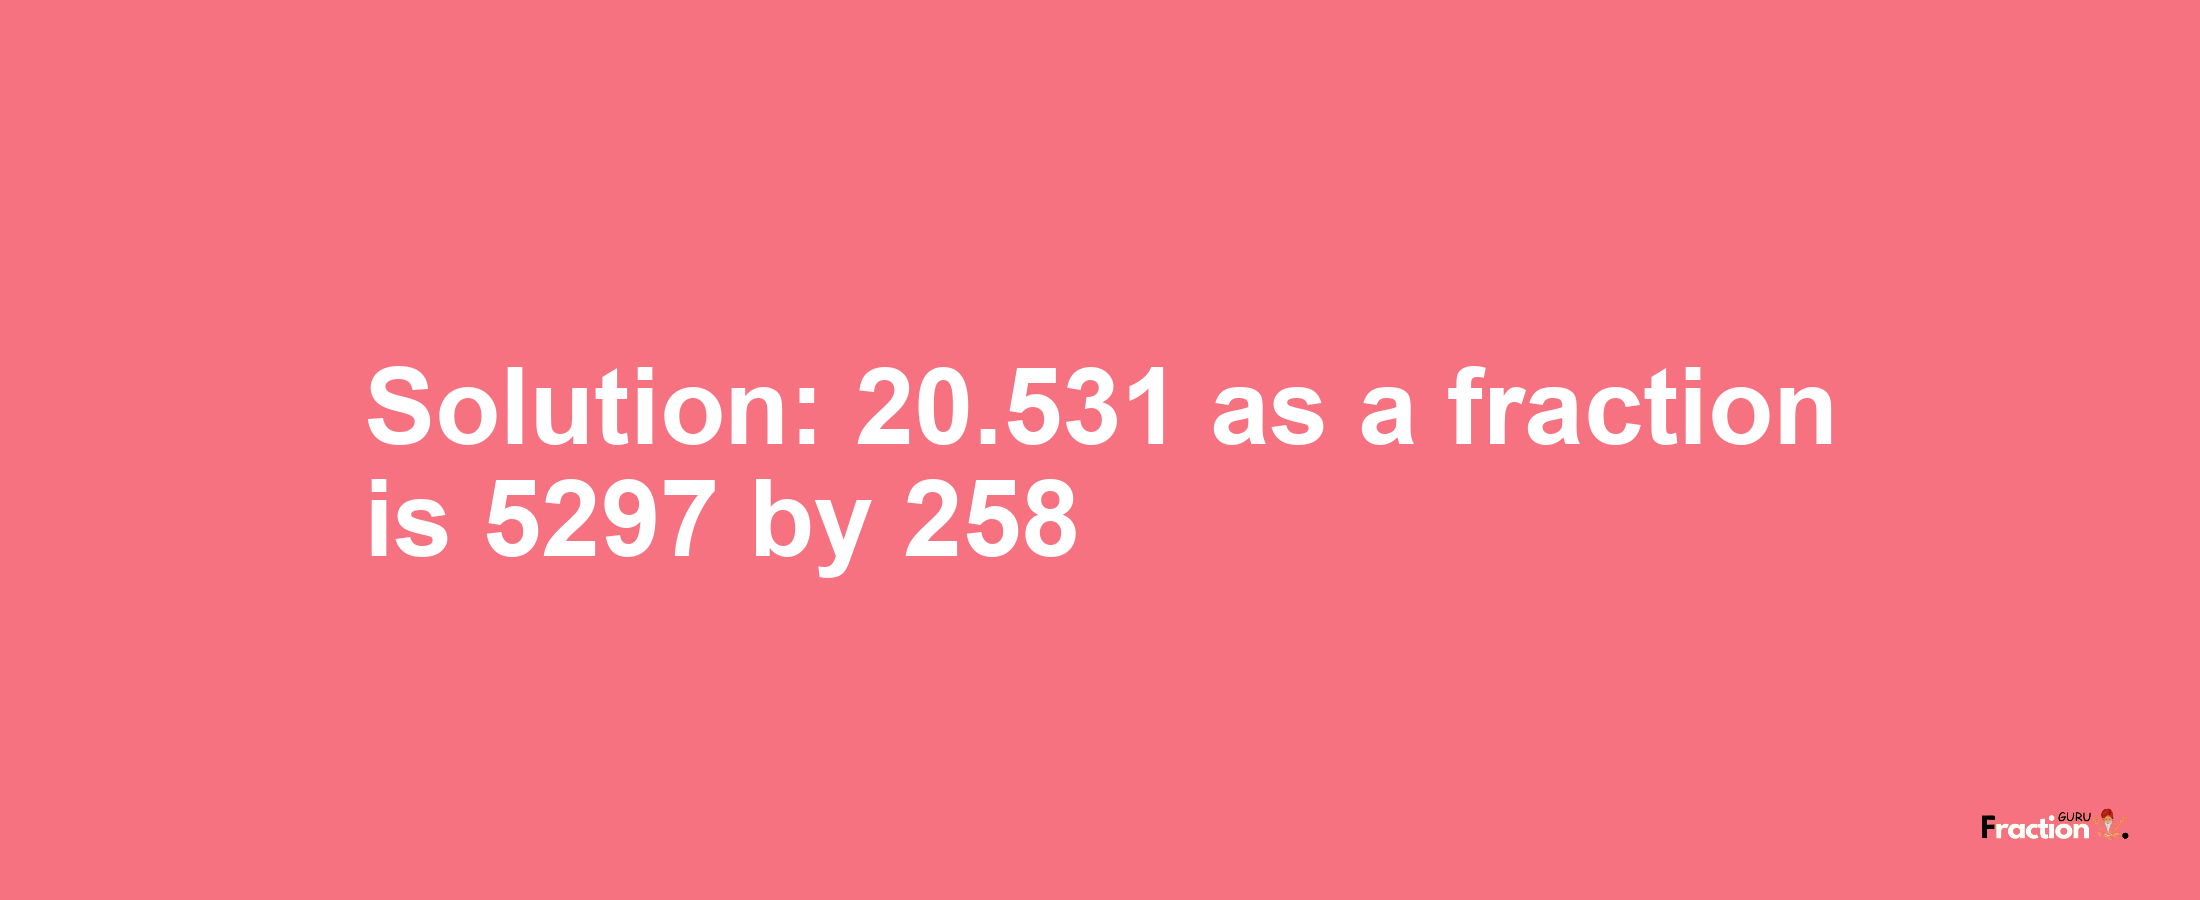 Solution:20.531 as a fraction is 5297/258